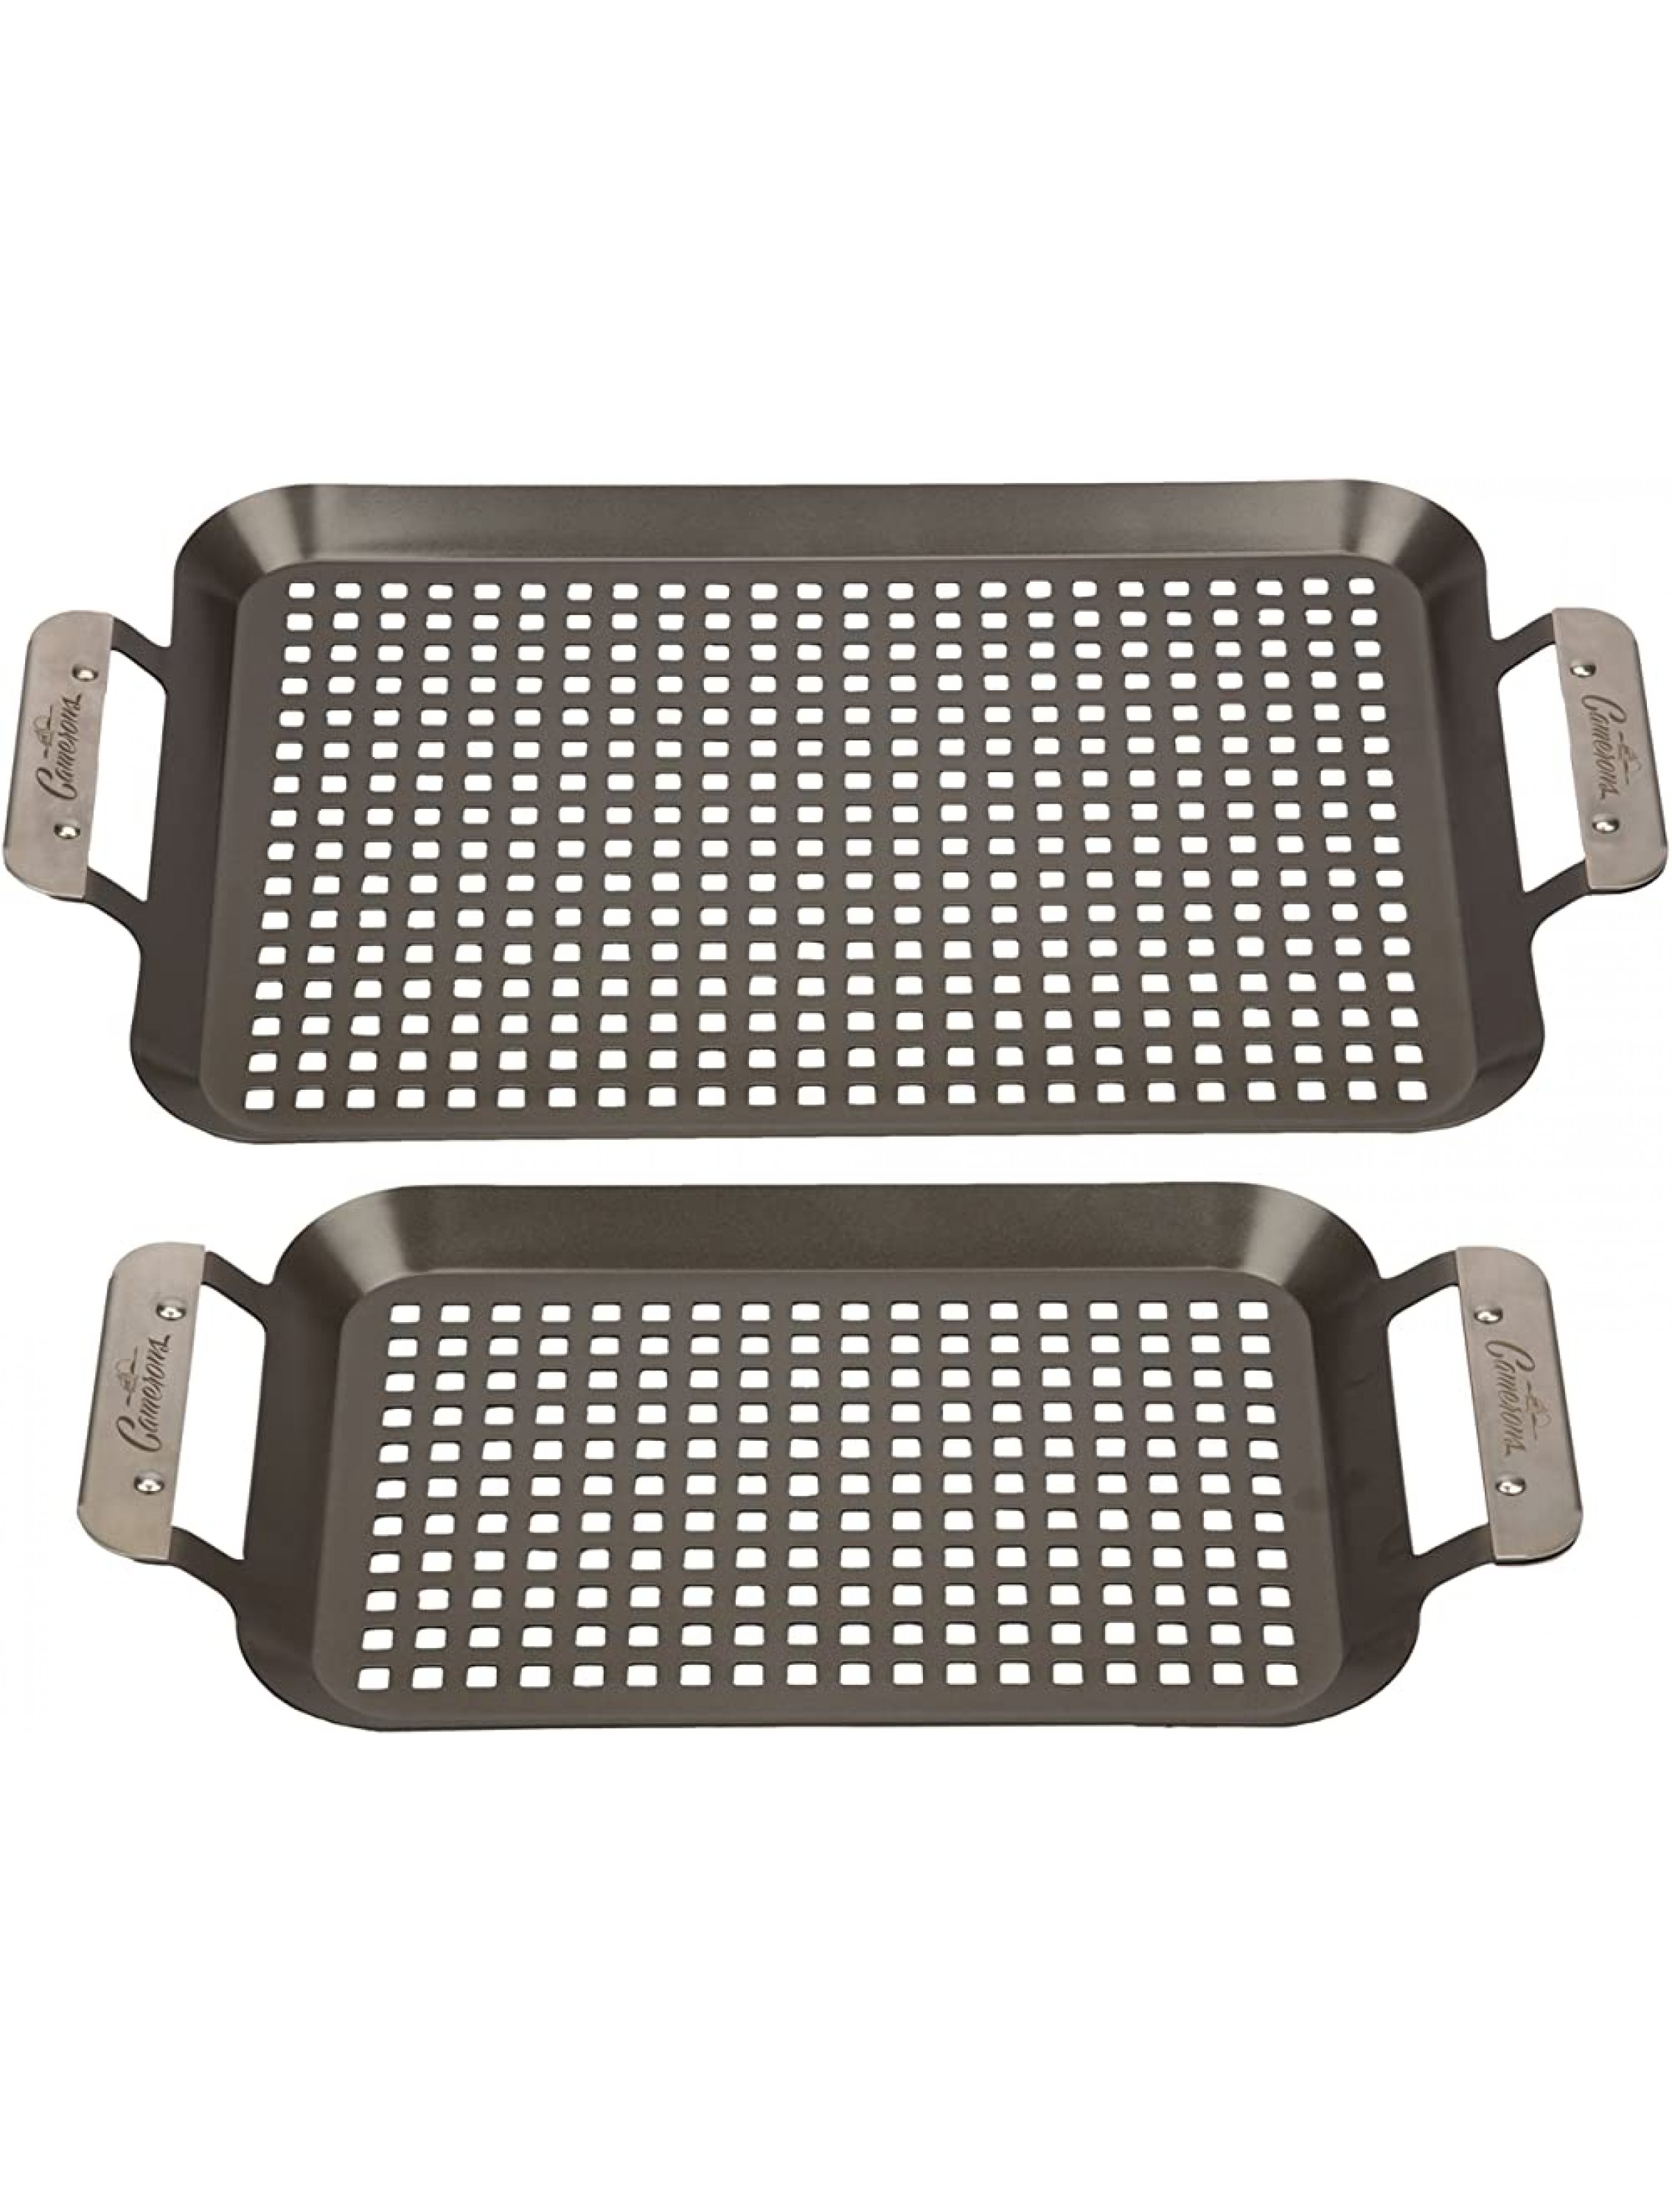 Grill Topper BBQ Grilling Pans Set of 2 Non-Stick Barbecue Trays w Stainless Steel Handles for Meat Vegetables and Seafood - BPIGY29RY